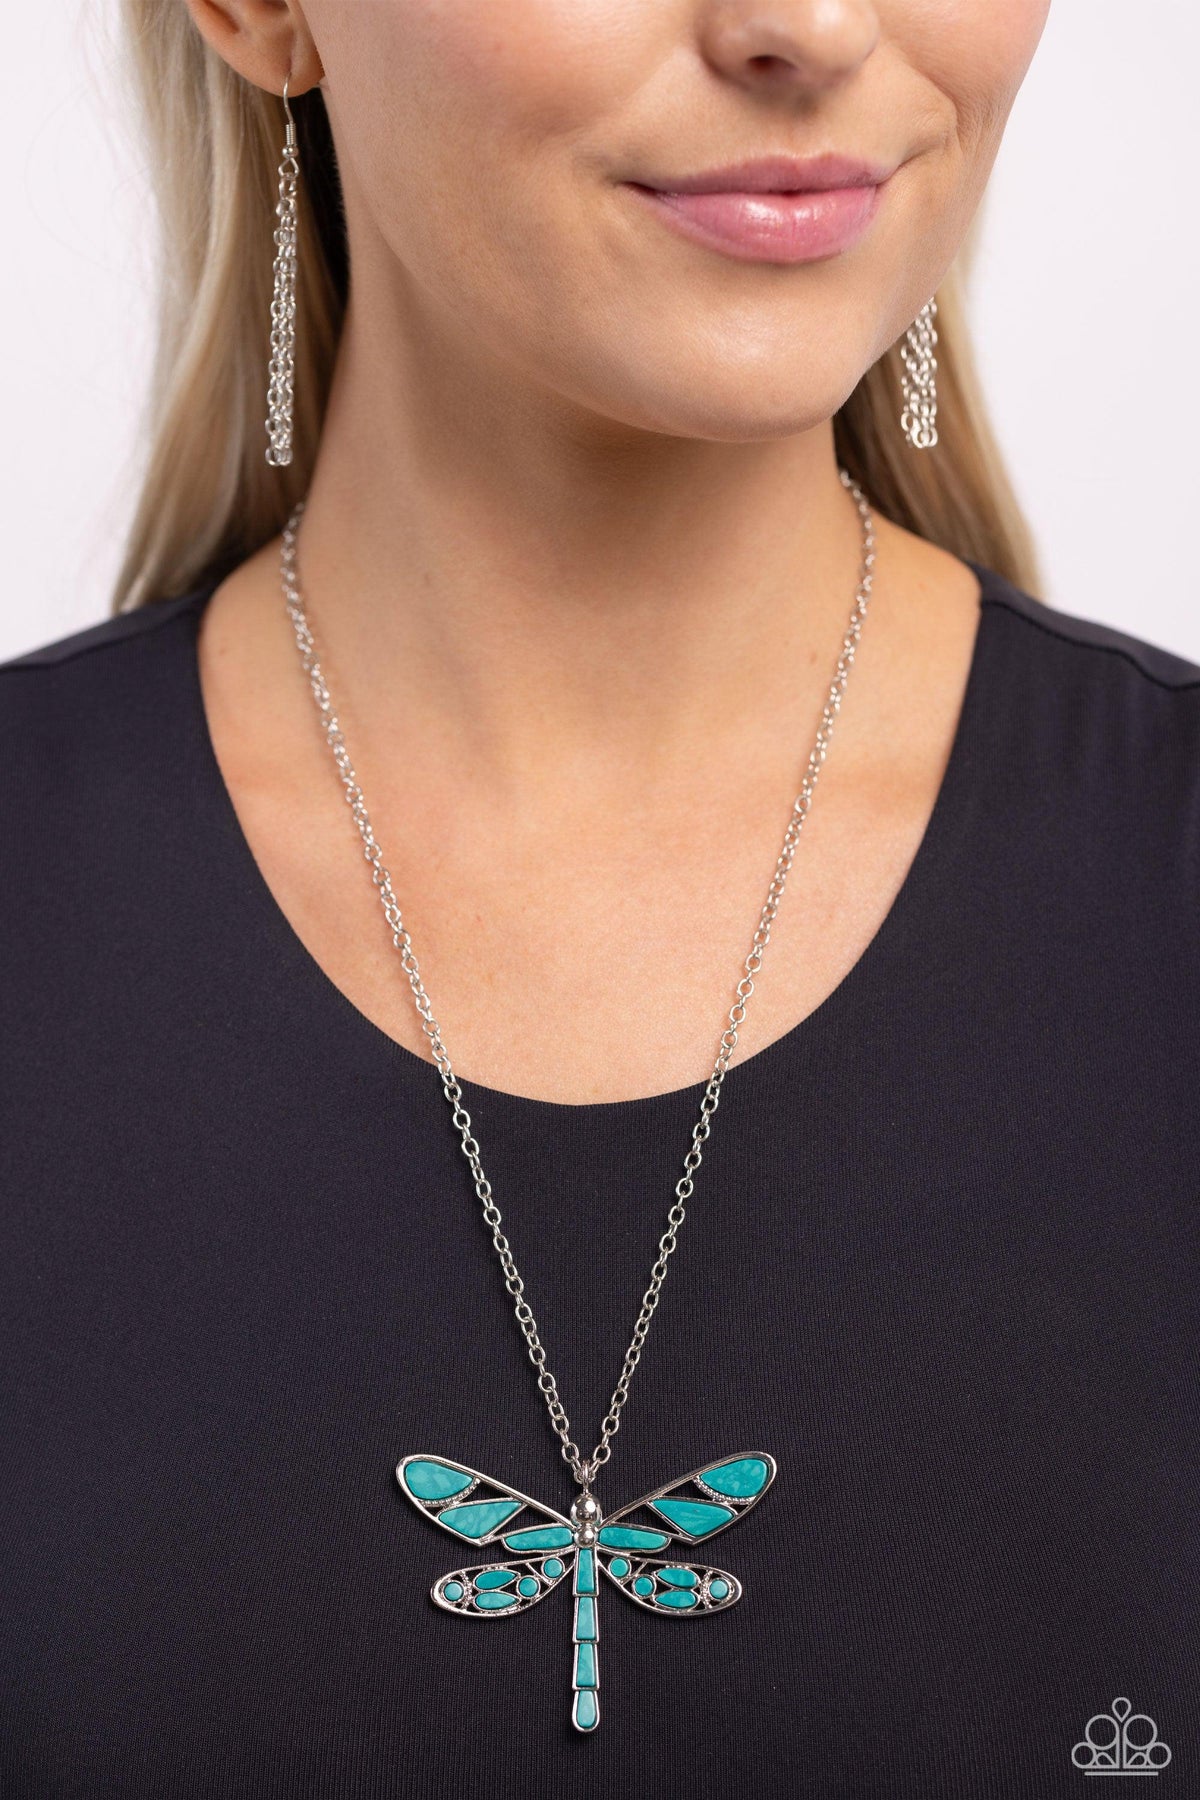 FLYING Low Teal Green Stone Dragonfly Necklace - Paparazzi Accessories-on model - CarasShop.com - $5 Jewelry by Cara Jewels